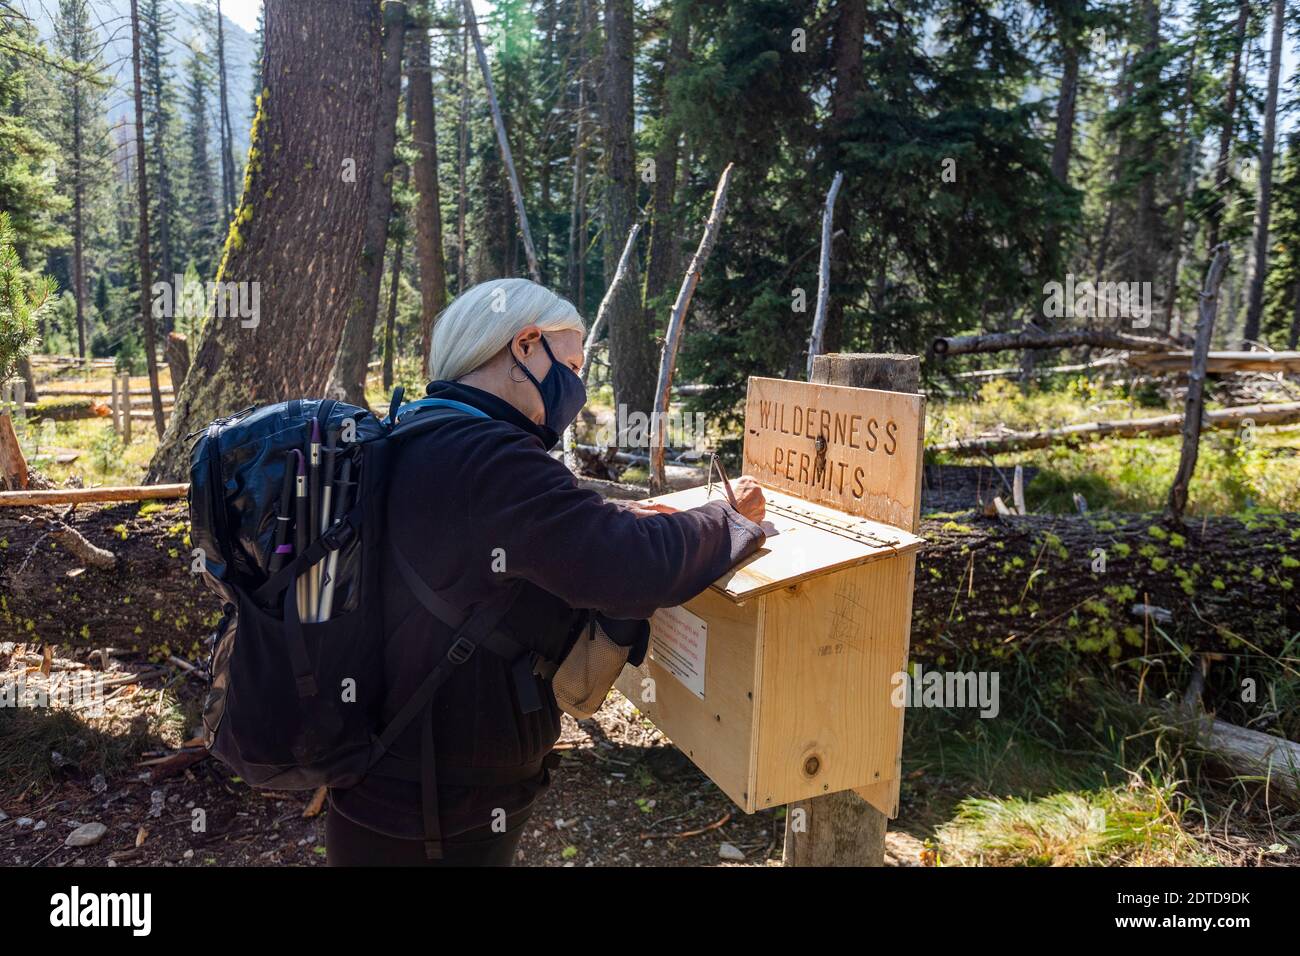 USA, Idaho, Stanley, Senior woman in protective mask signing wilderness permit before hiking Stock Photo